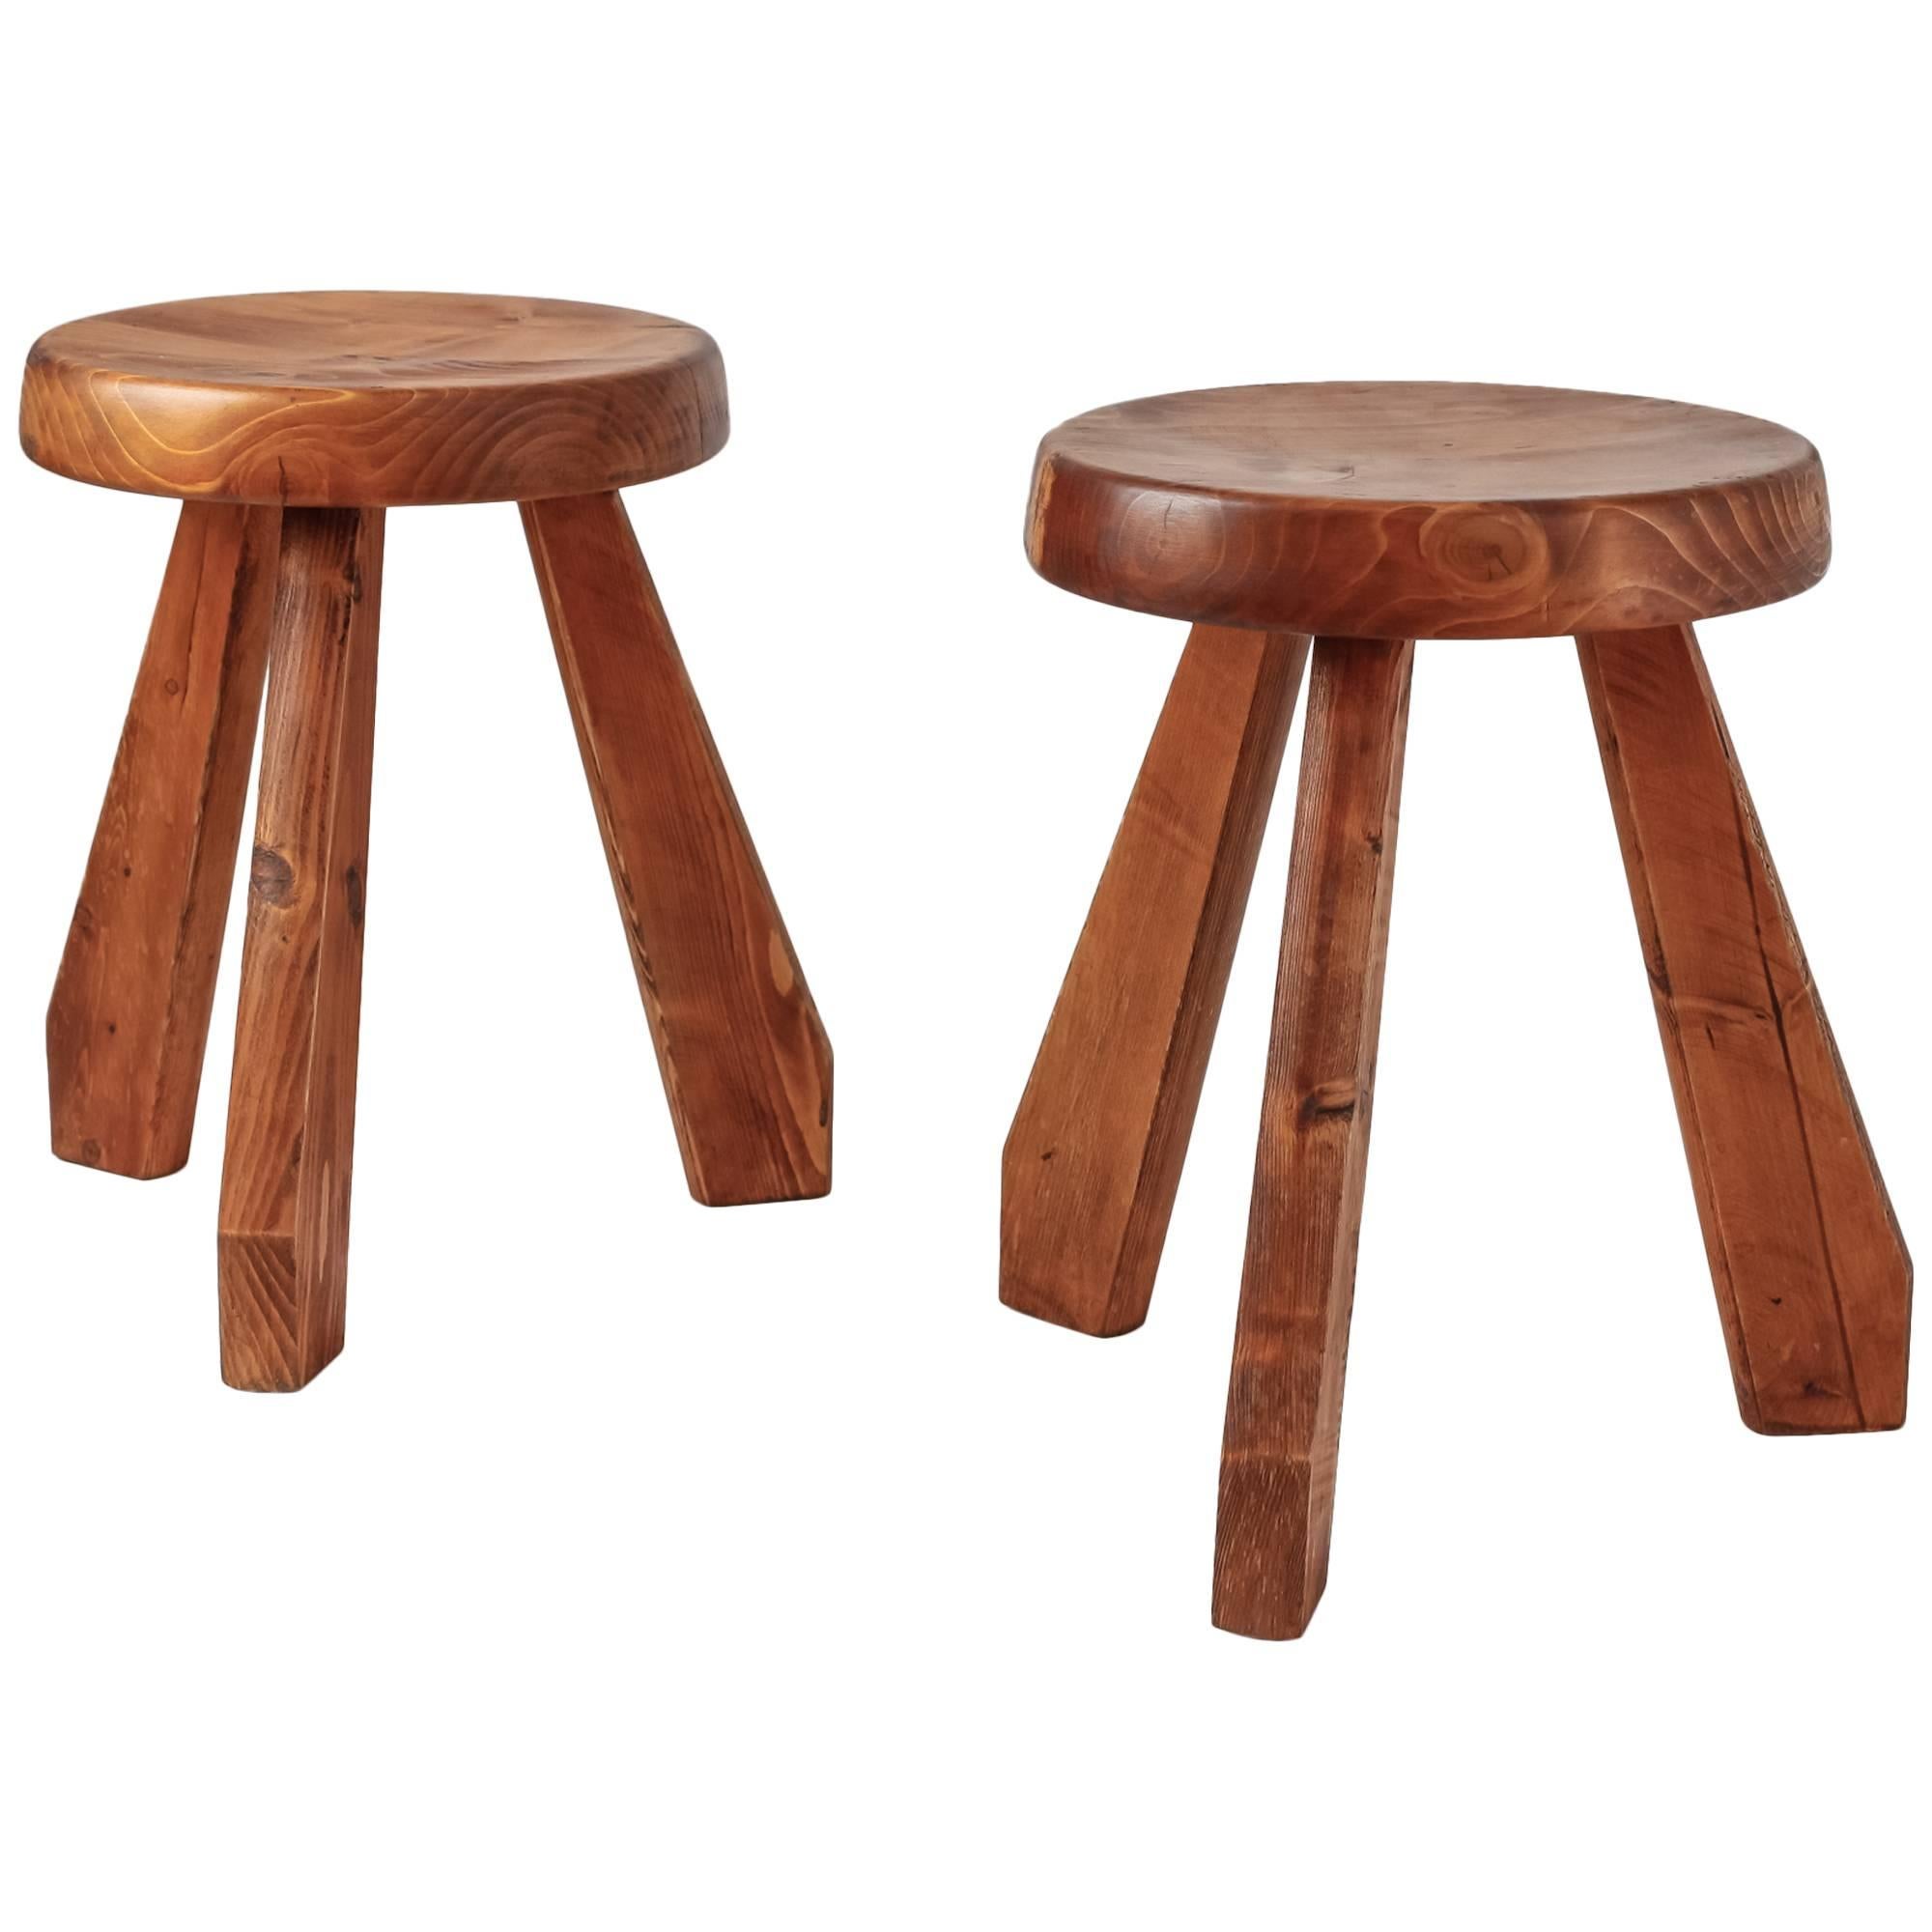 Charlotte Perriand Pair of Les Arcs Stools, France, 1960s For Sale